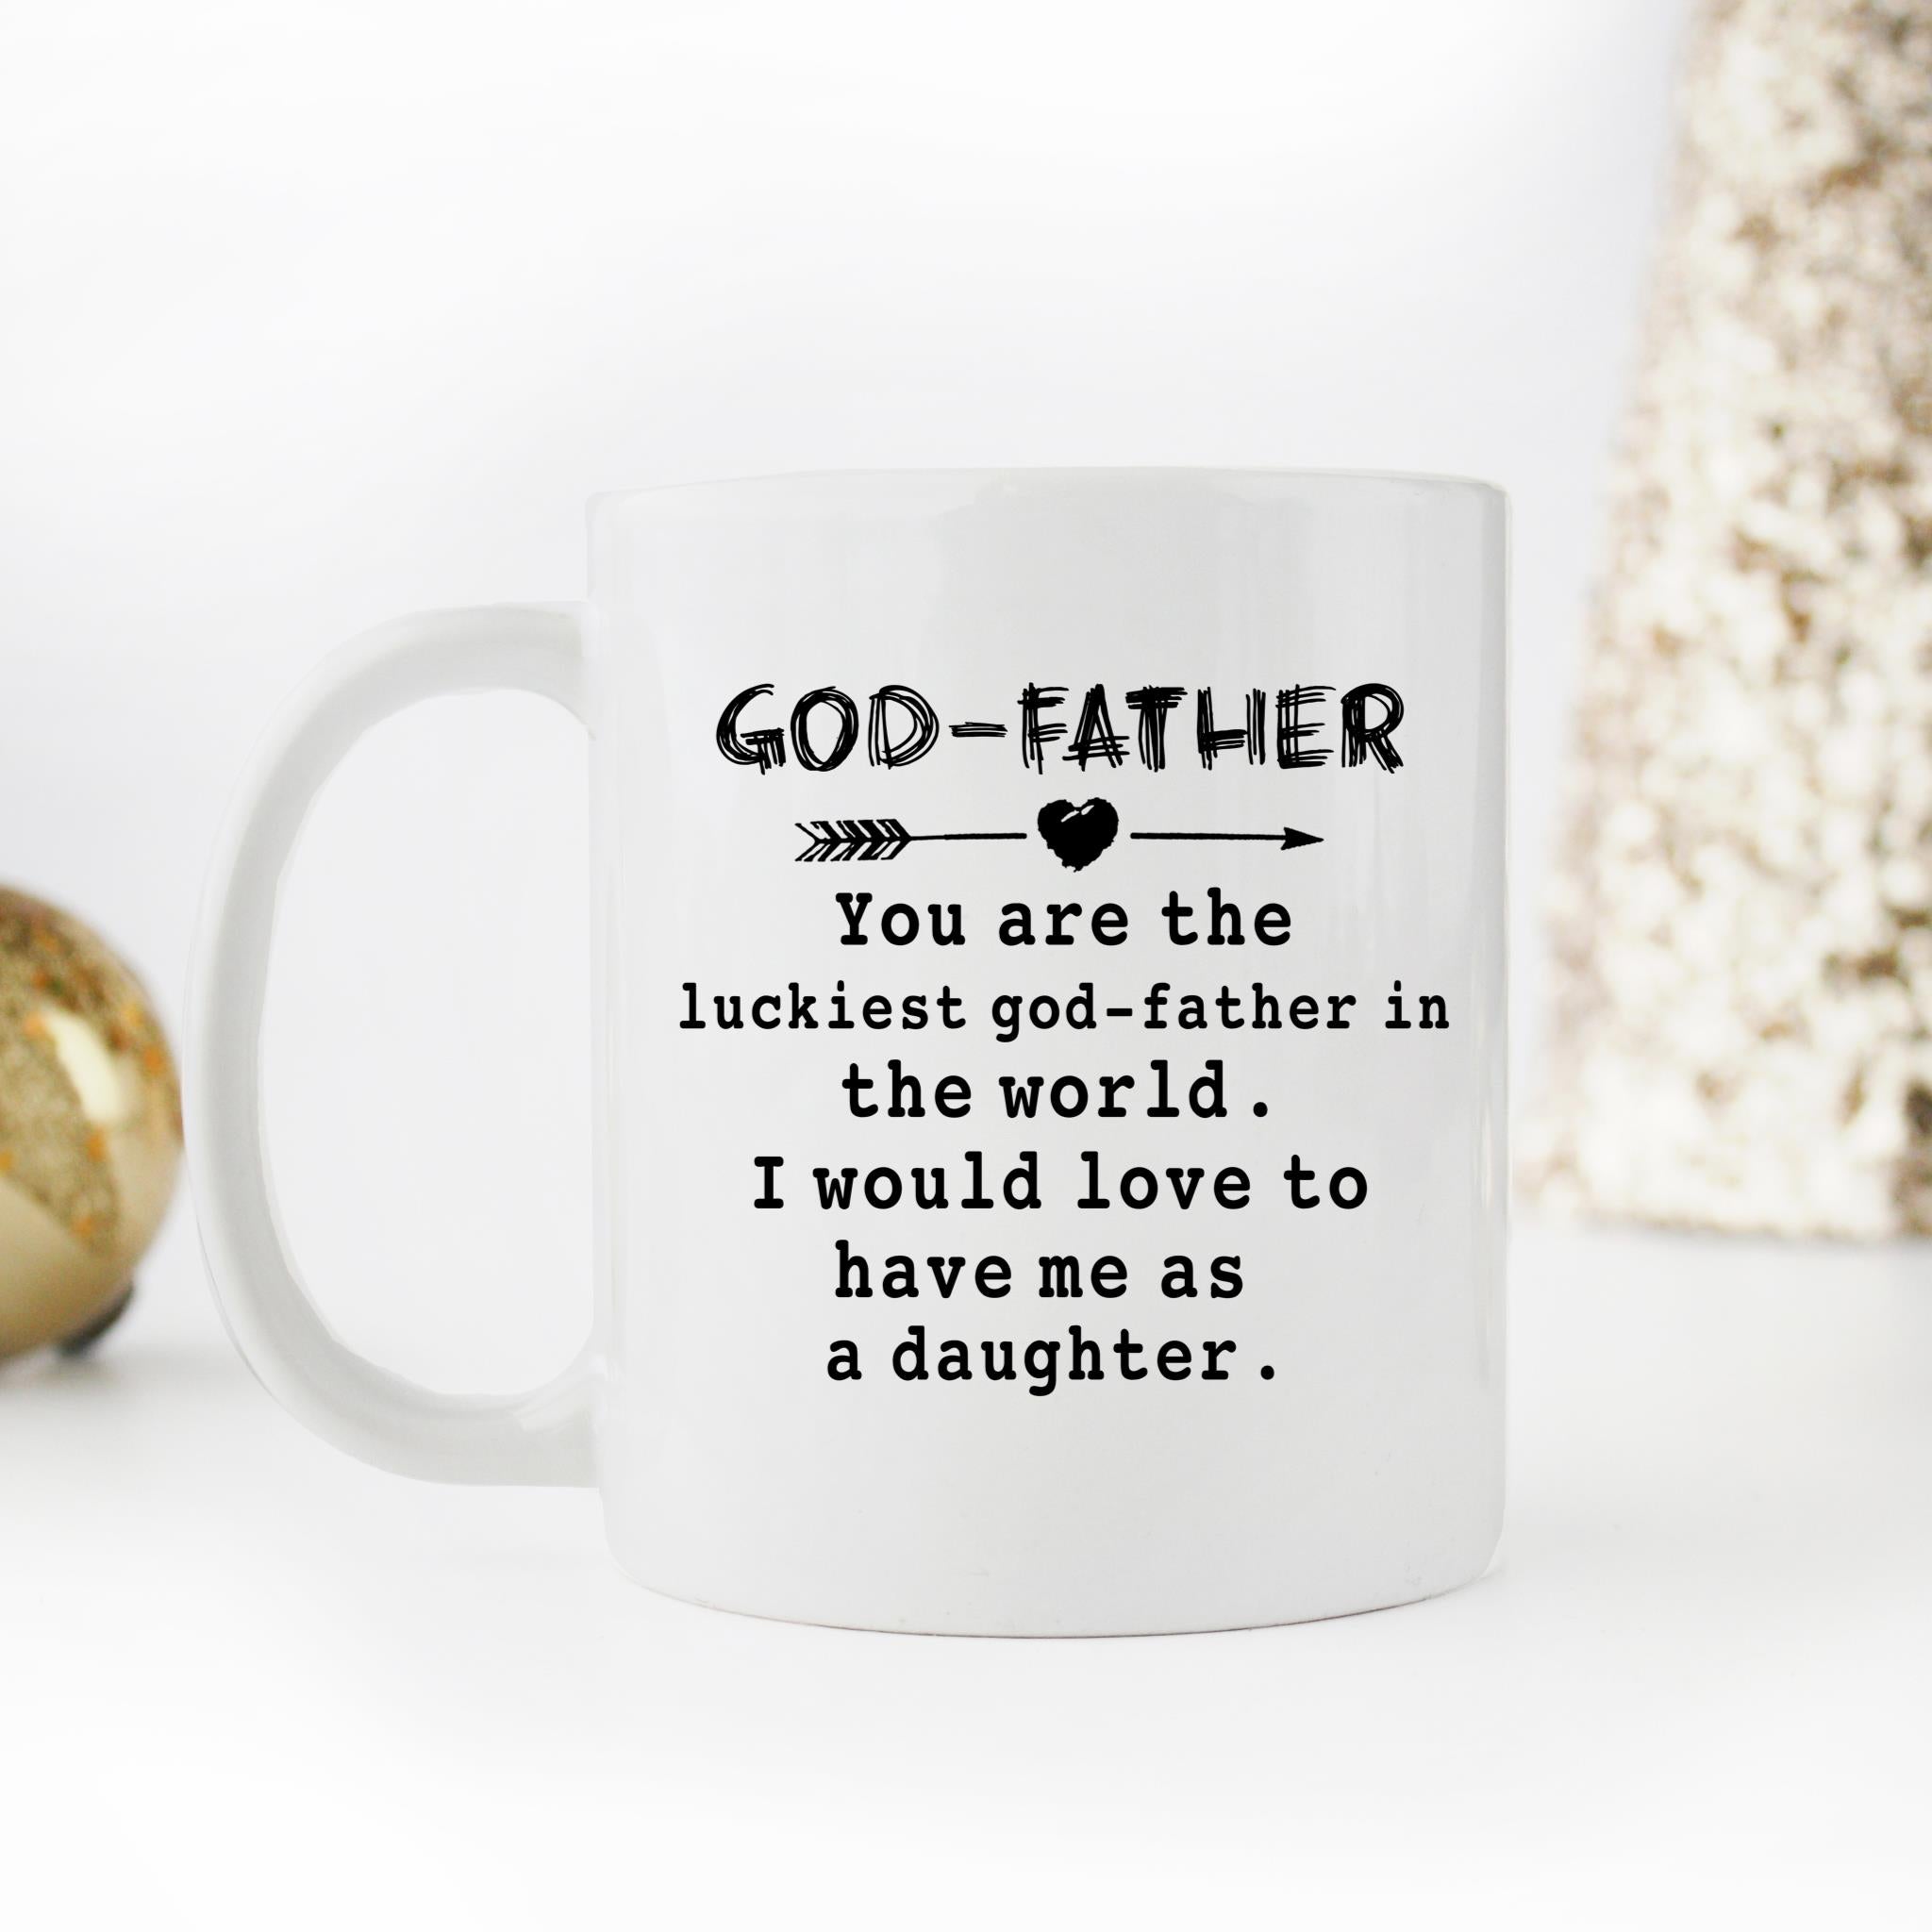 Skitongifts Funny Ceramic Novelty Coffee Mug You're The Luckiest God-Father In The World. I Would Love To Have Me As A Daughter Father's Day Gifts